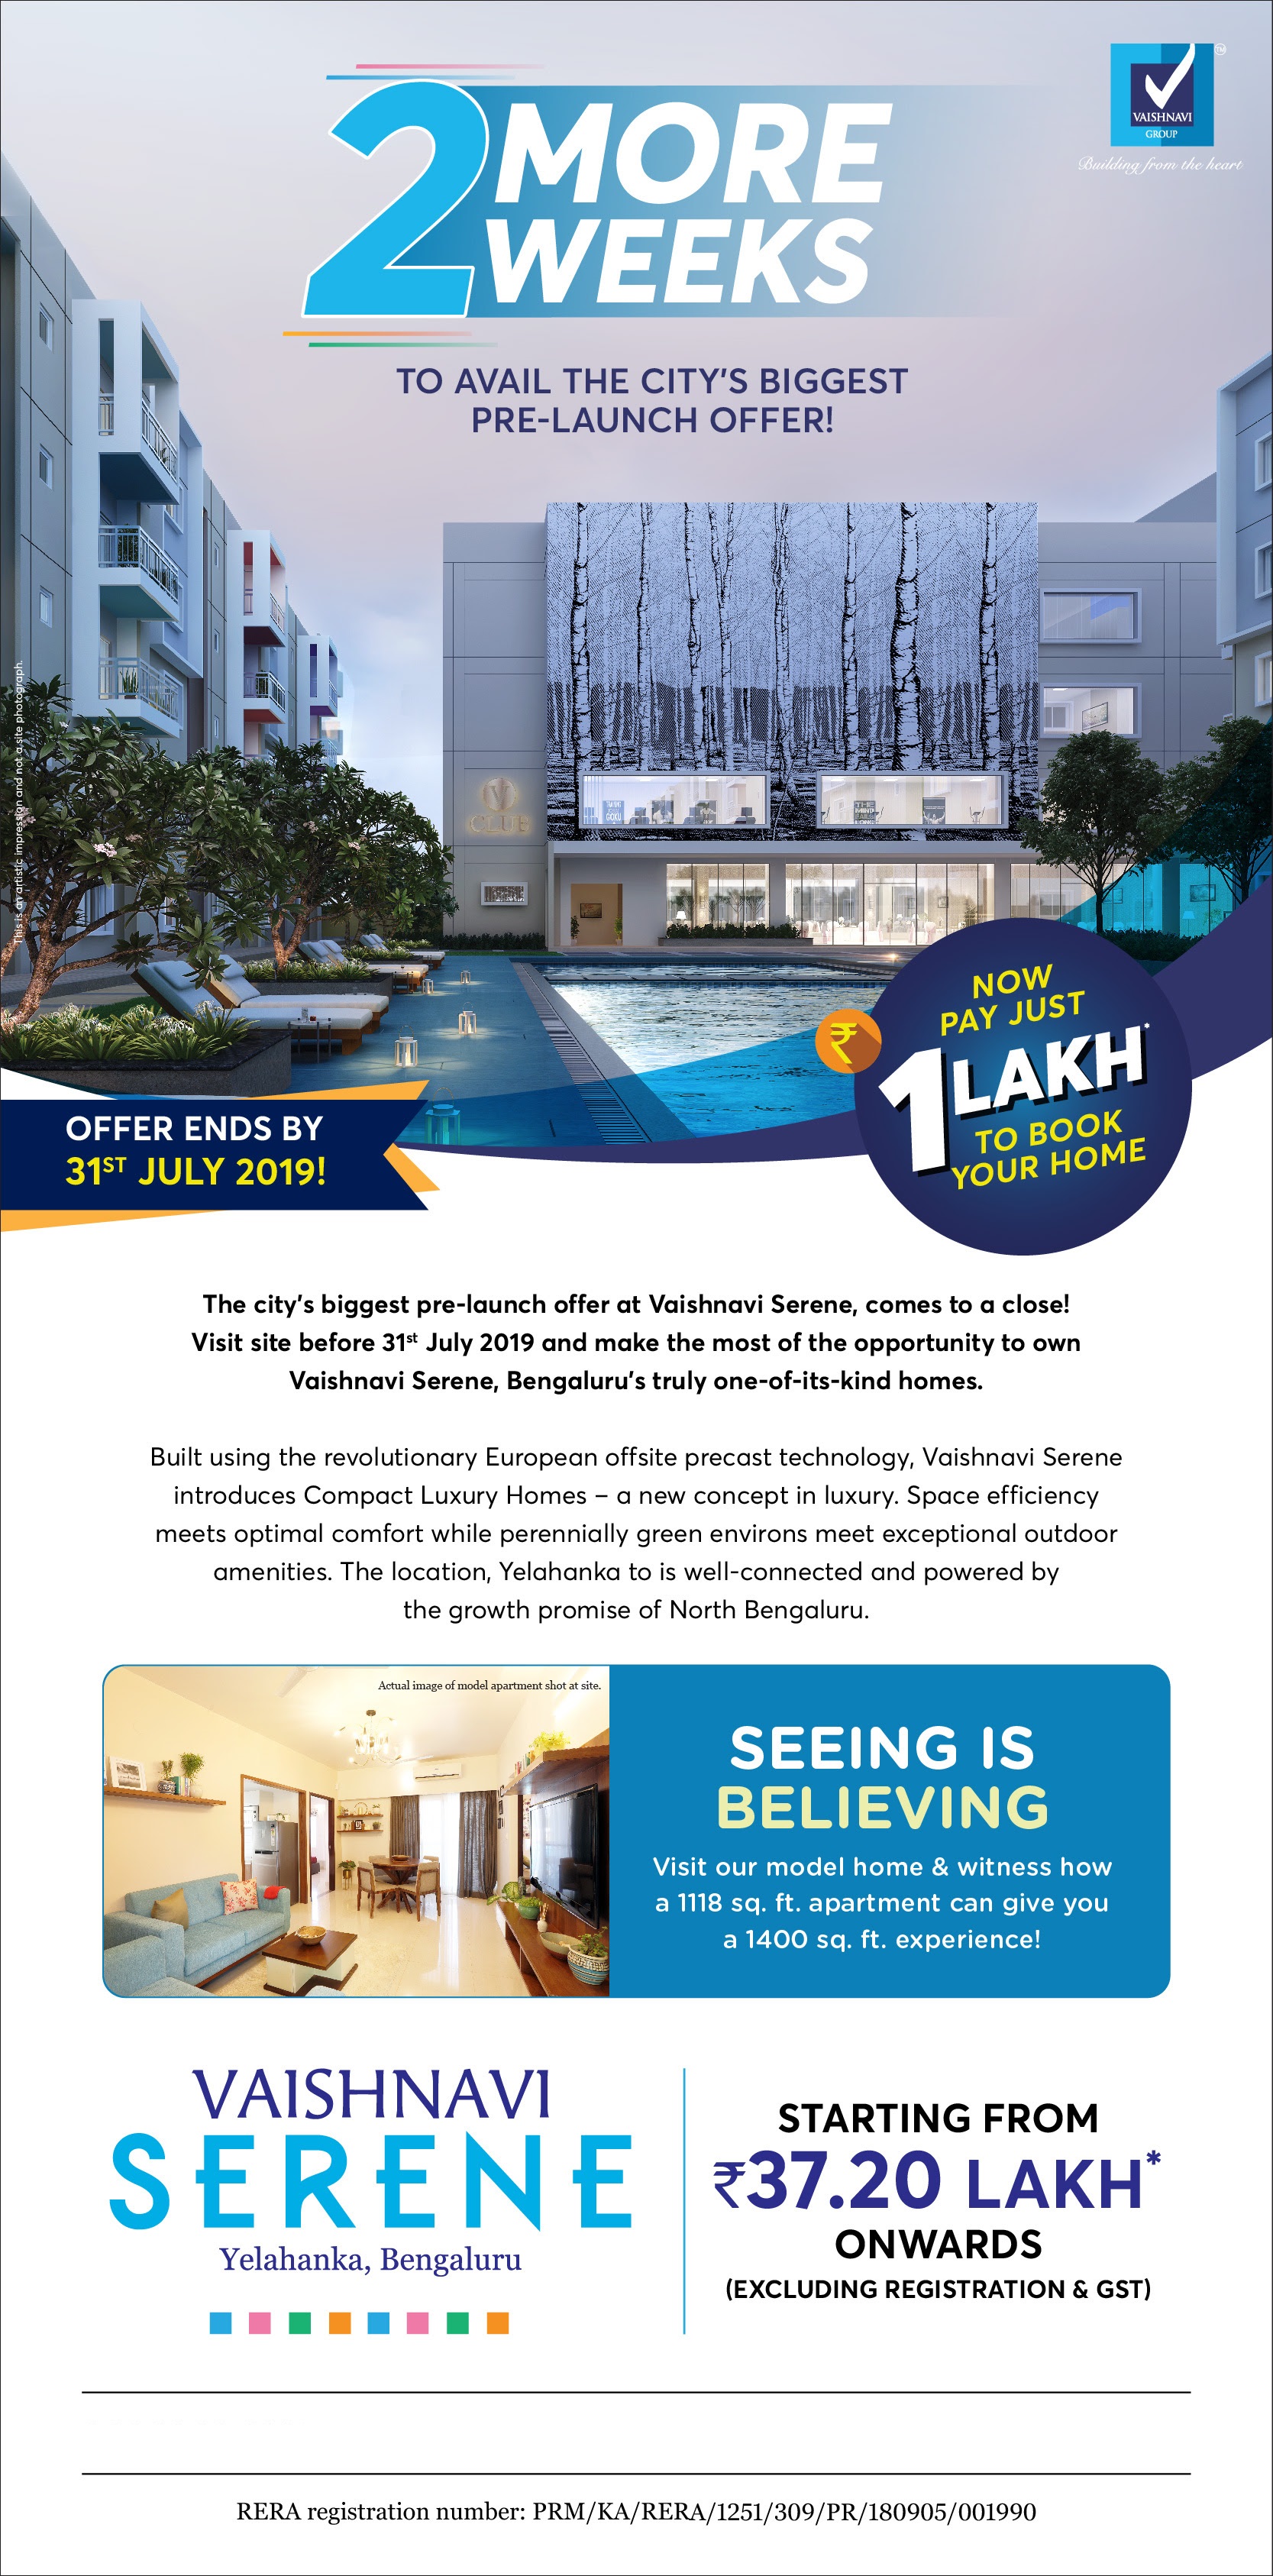 Avail the city's biggest pre -launch offer at Vaishnavi Serene, Bangalore